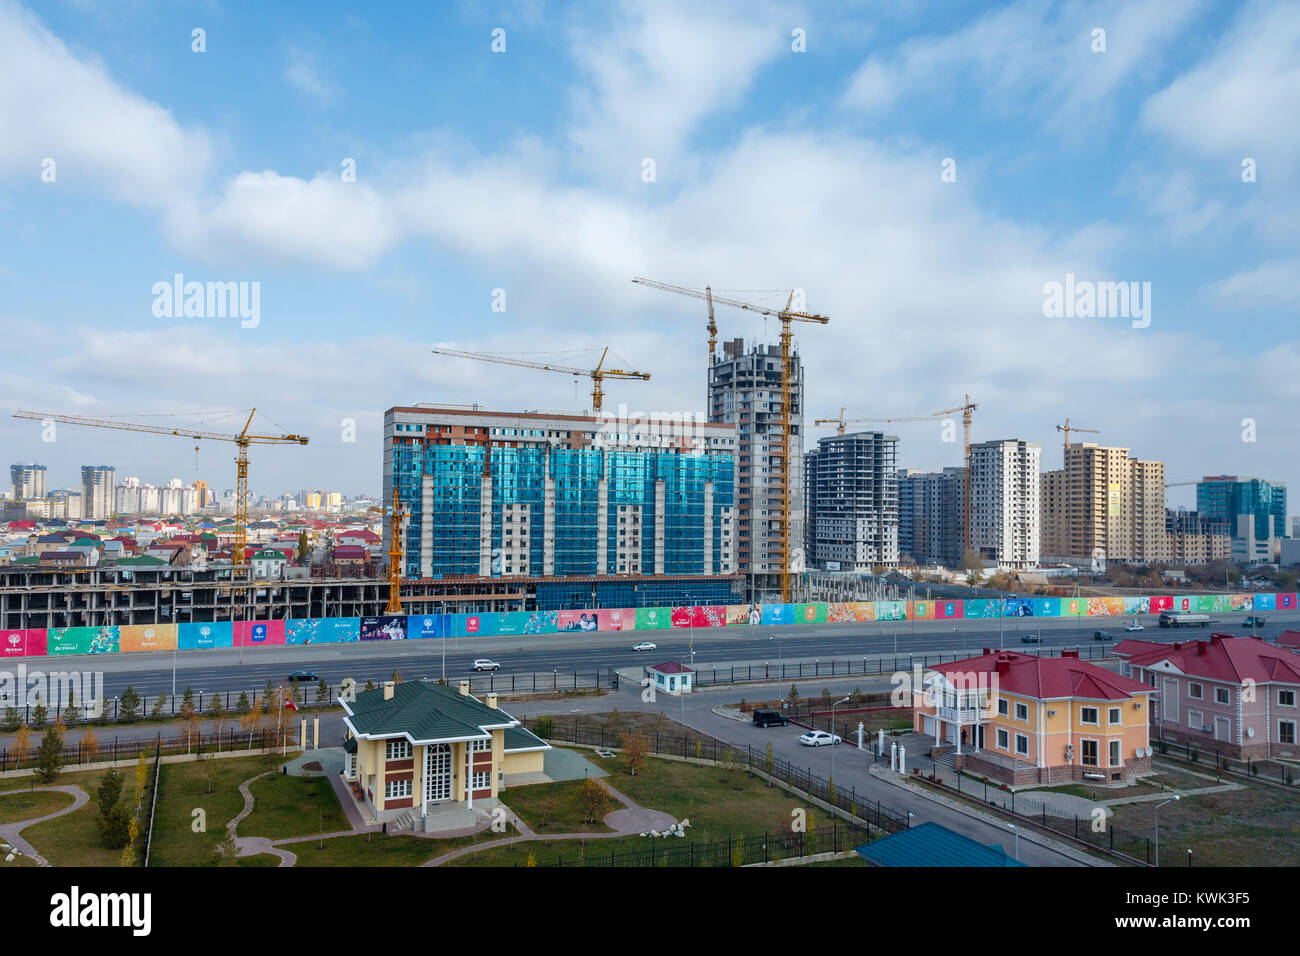 Building works being carried out on development of new modern buildings and view over the town, Nur-Sultan (Astana), capital city of Kazakhstan Stock Photo